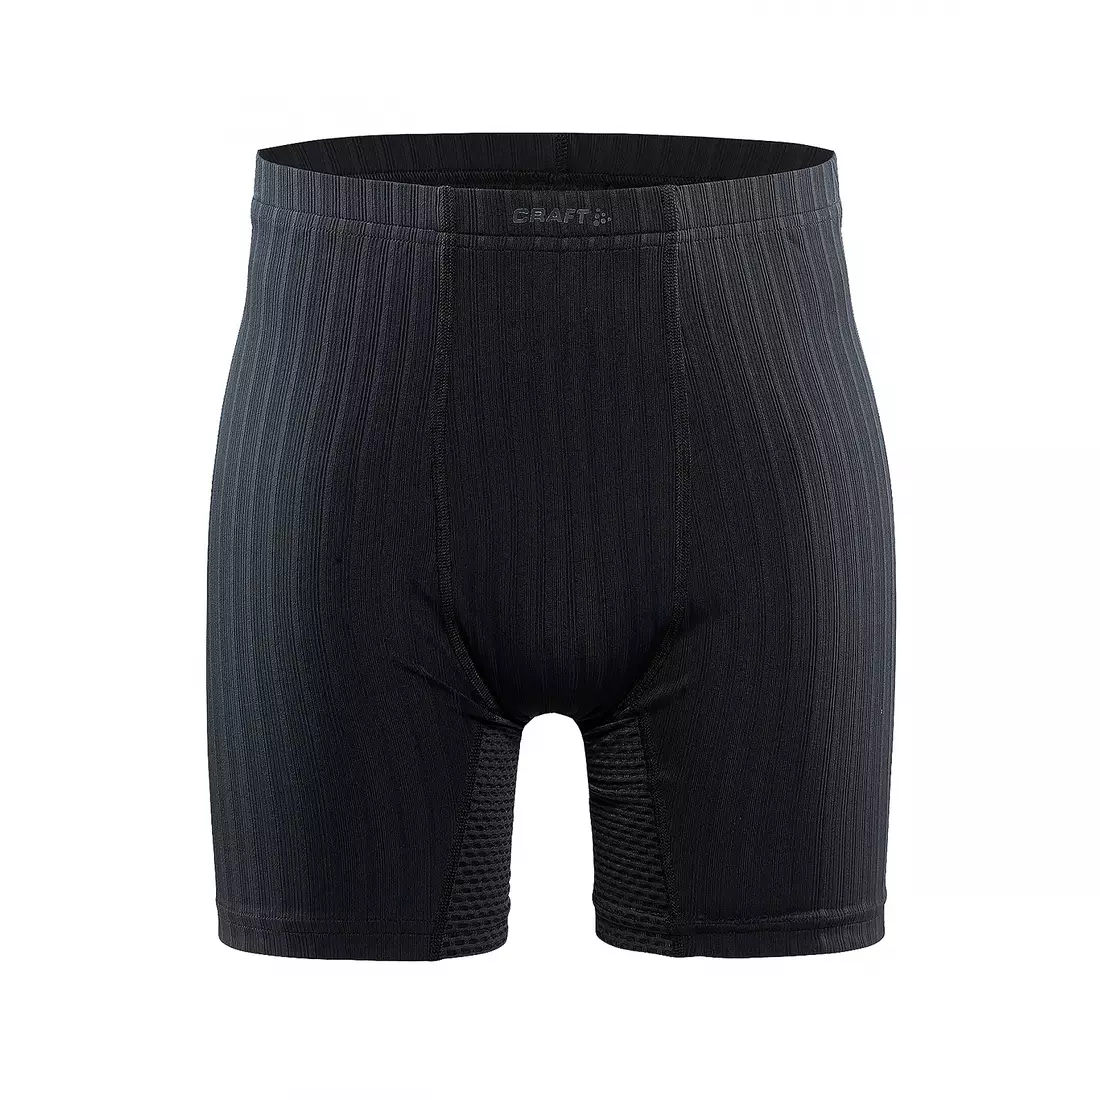 CRAFT BE ACTIVE EXTREME 2.0 men's boxer shorts 1904496-9999